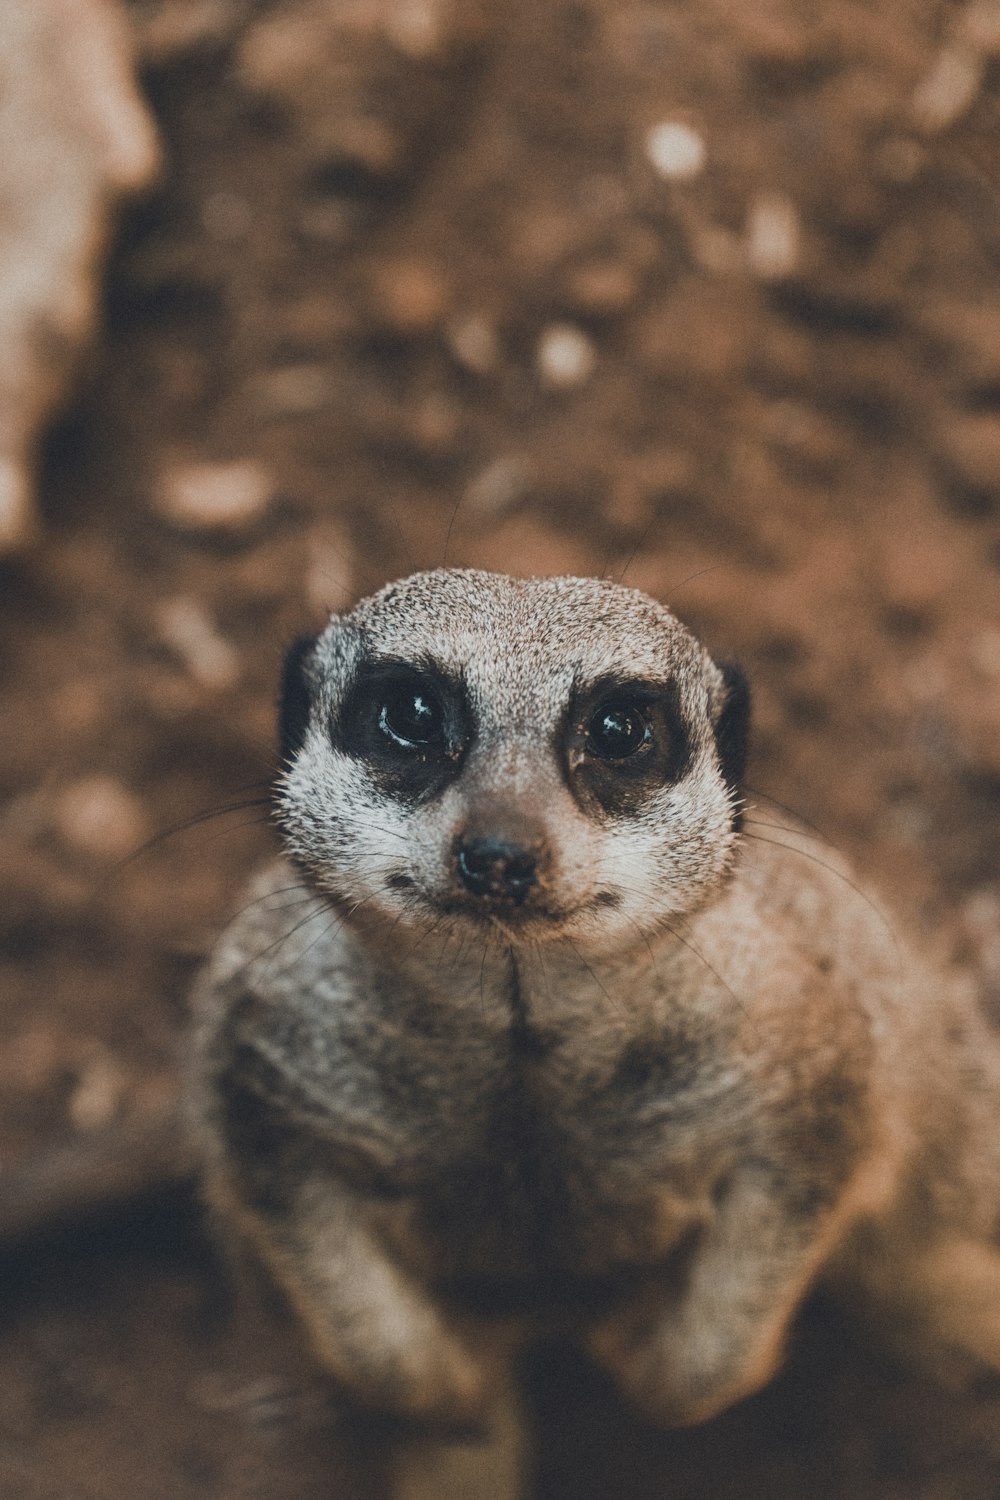 a close up of a small animal on a dirt ground